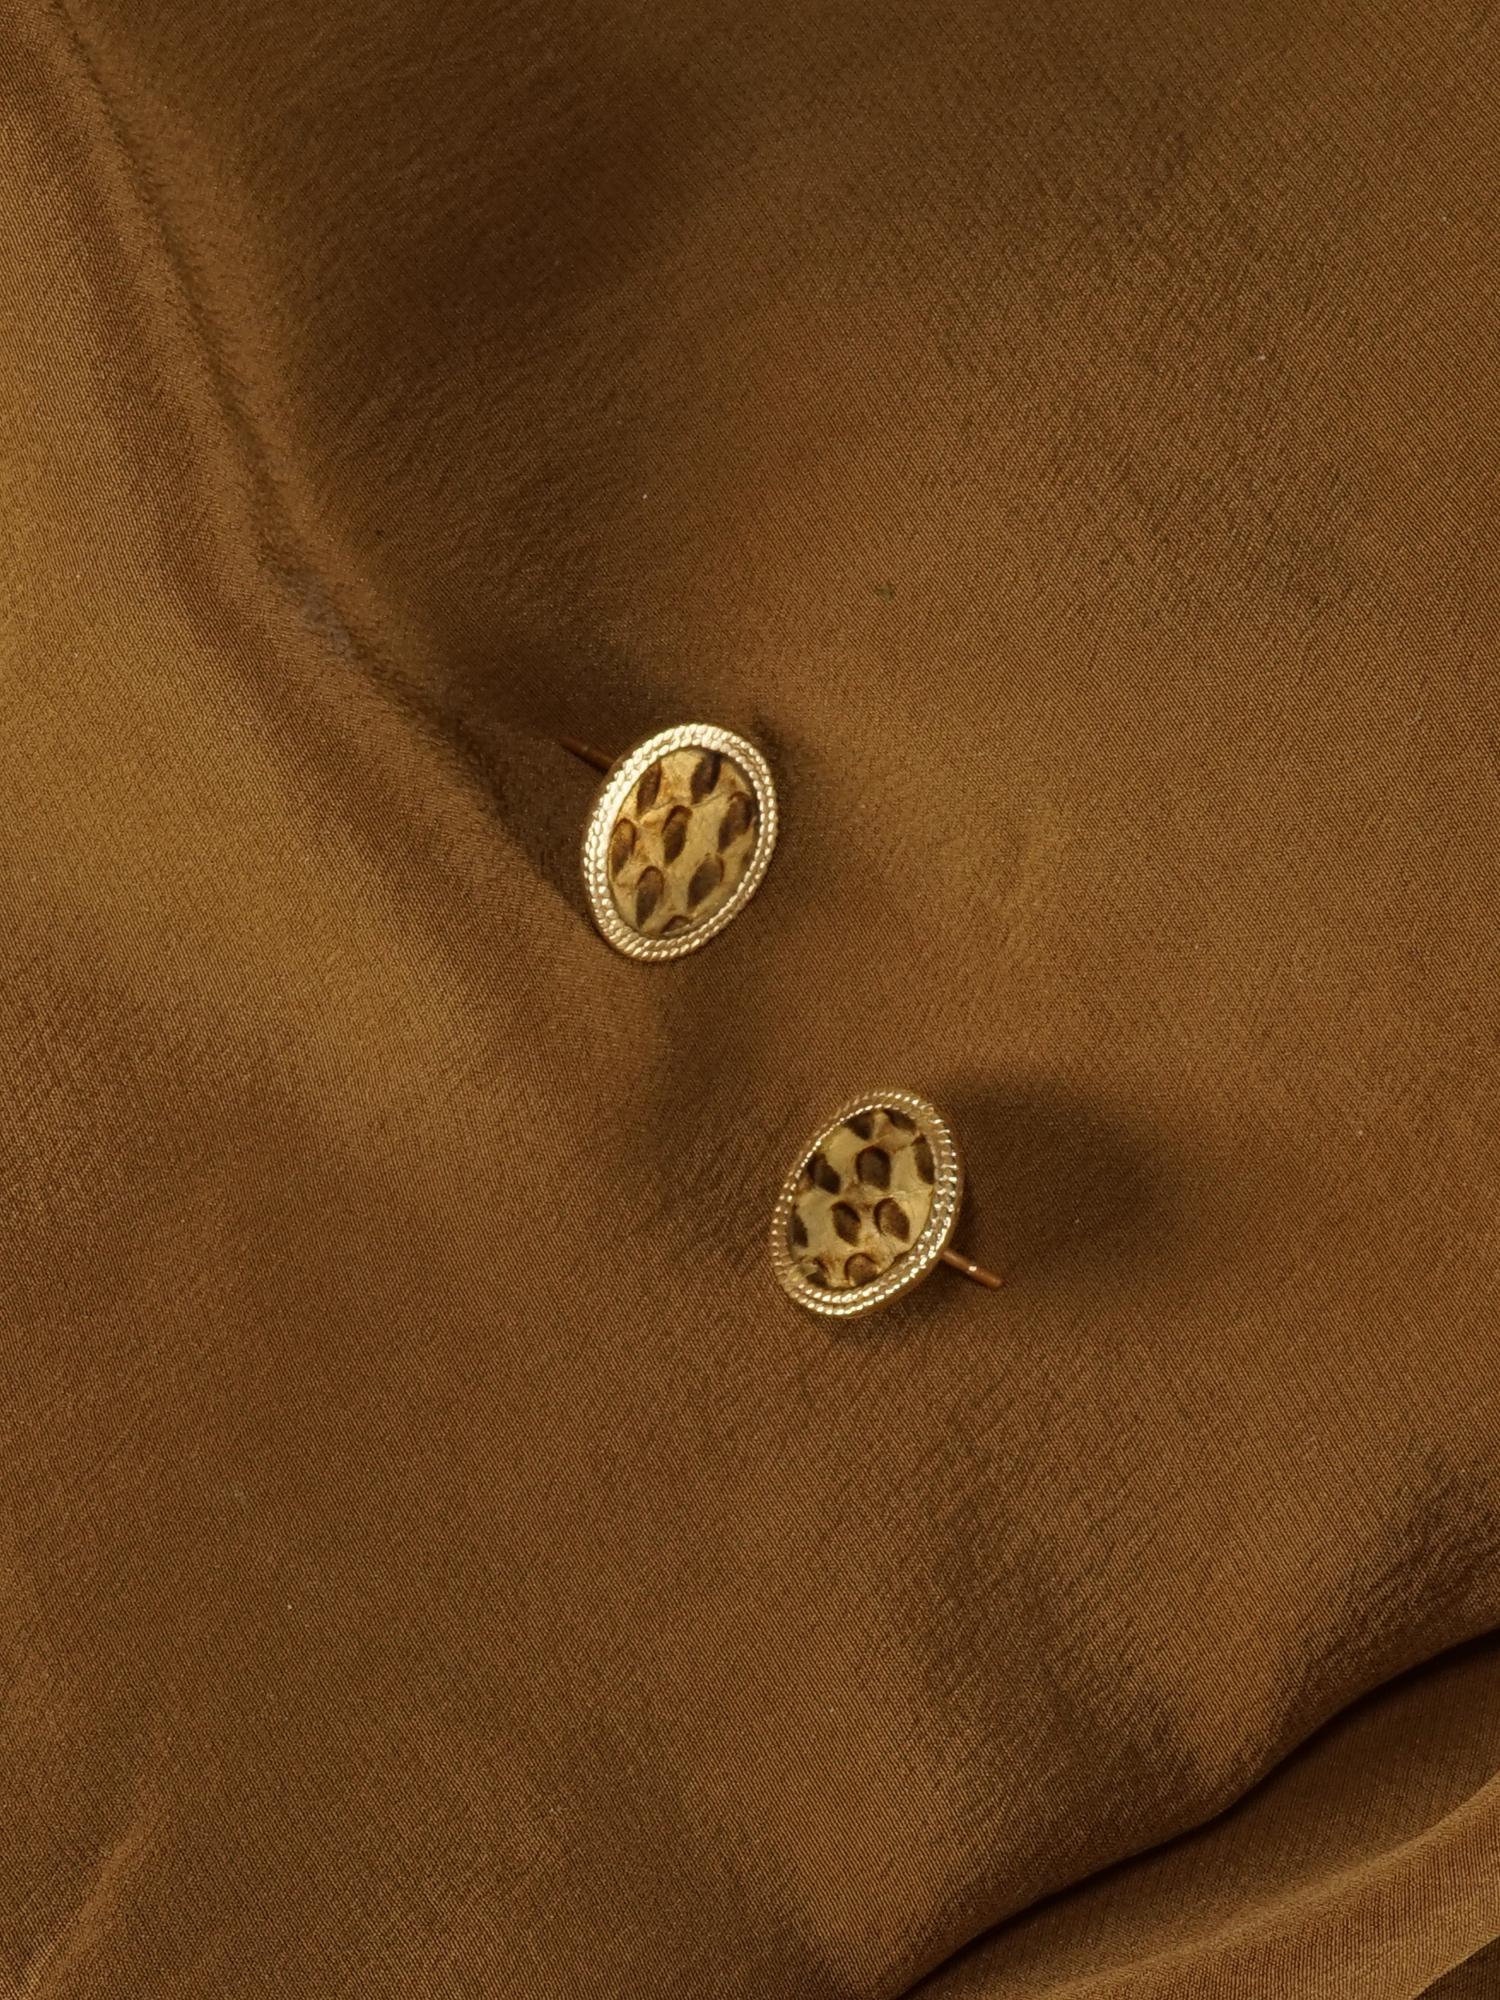 Women's 14 Karat Gold Byzantine Inspired Stud Earrings with Vintage Anaconda Leather For Sale